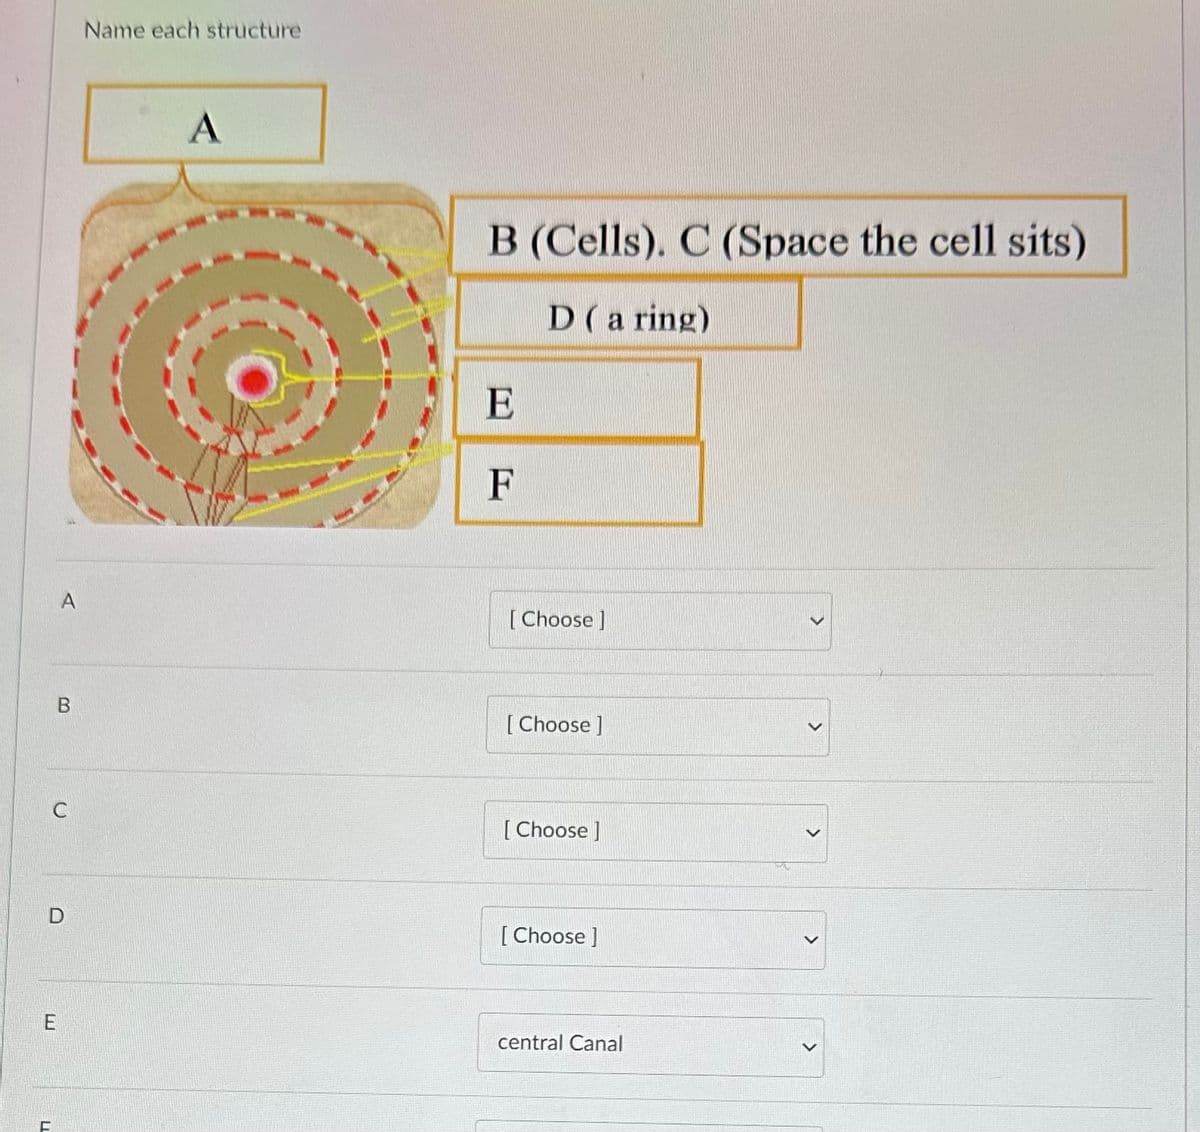 A
B
LL
C
D
E
Name each structure
A
B (Cells). C (Space the cell sits)
D (a ring)
E
F
[Choose ]
[Choose ]
[Choose ]
[Choose ]
central Canal